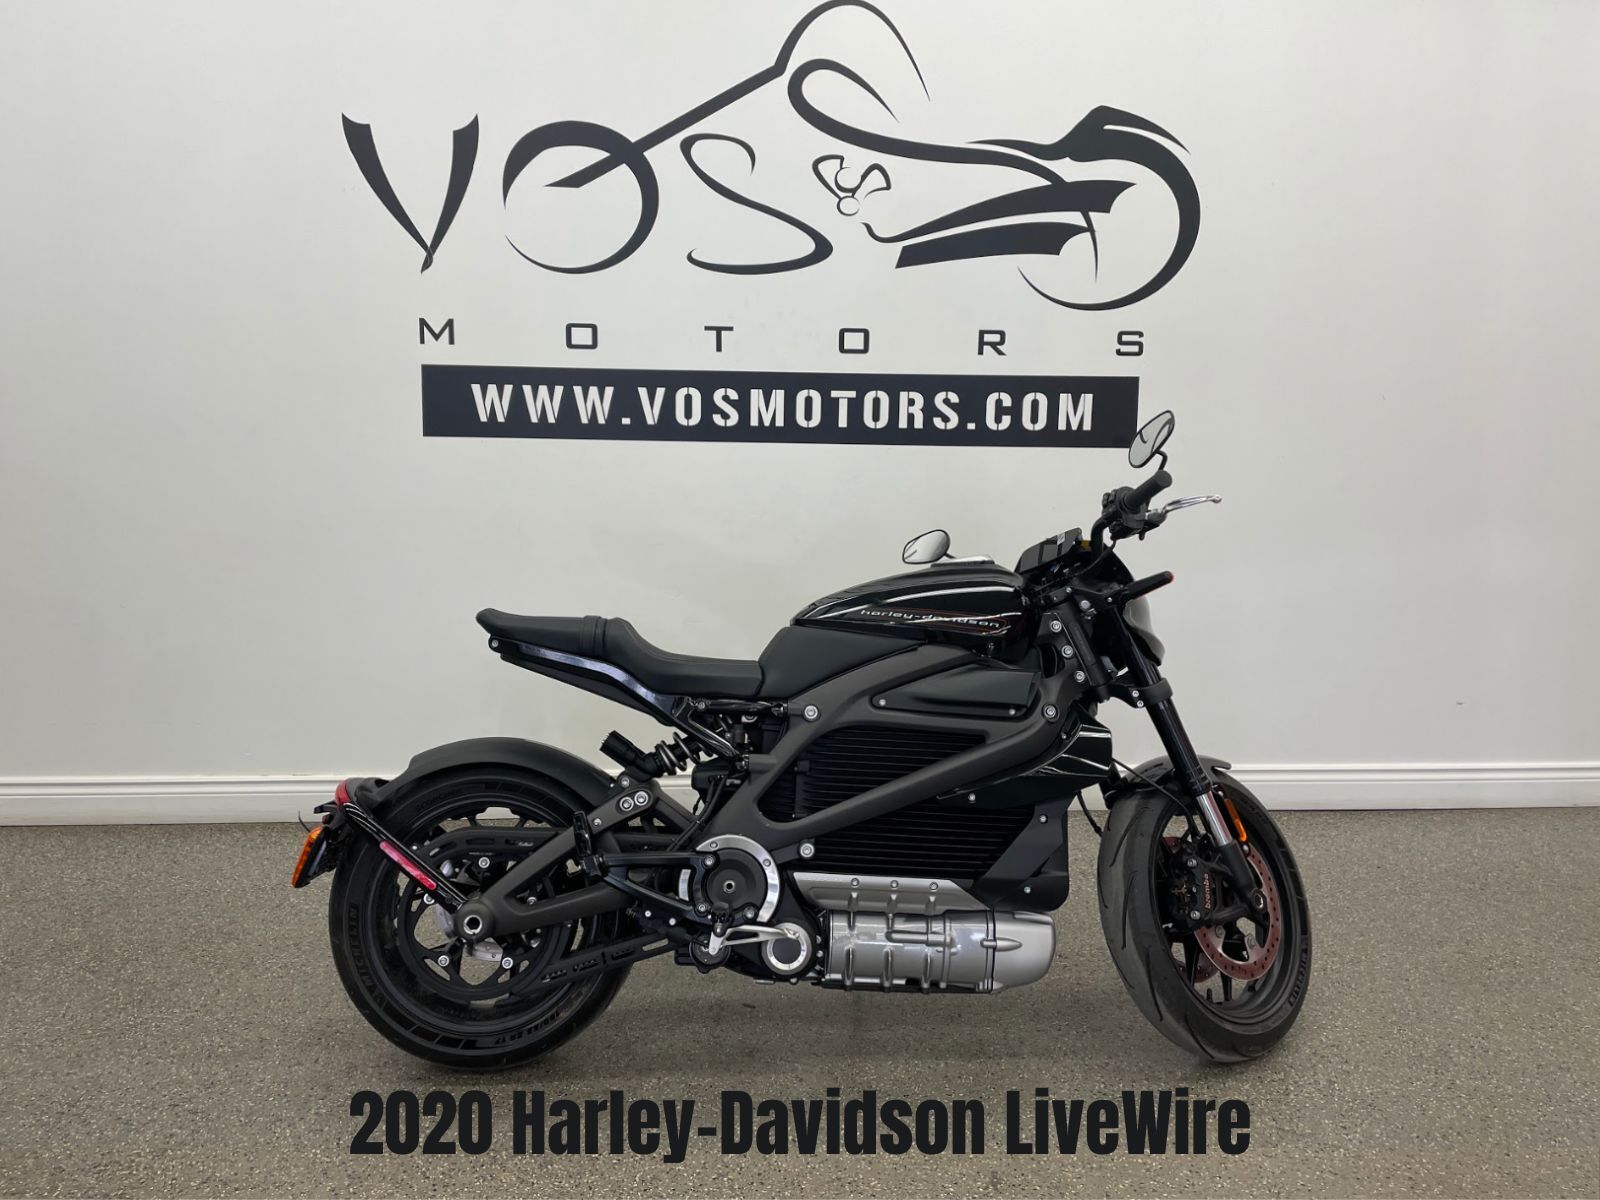 2020 Harley-Davidson LiveWire LiveWire ABS - V5035NP - -No Payments for 1 Year**